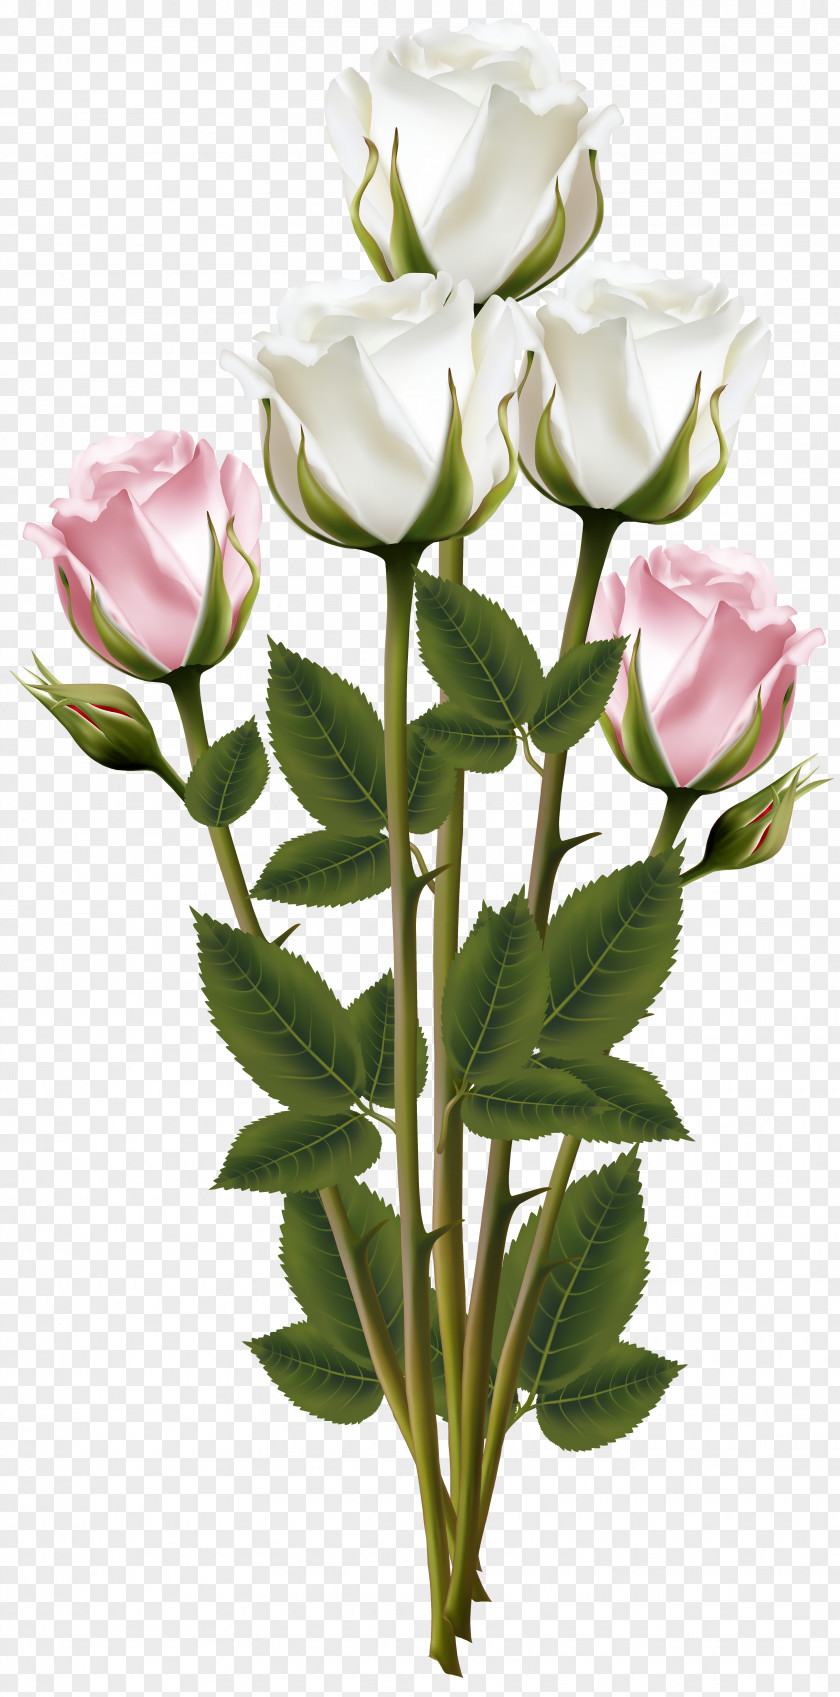 White And Pink Rose Bouquet Transparent Clip Art Image Flower PNG